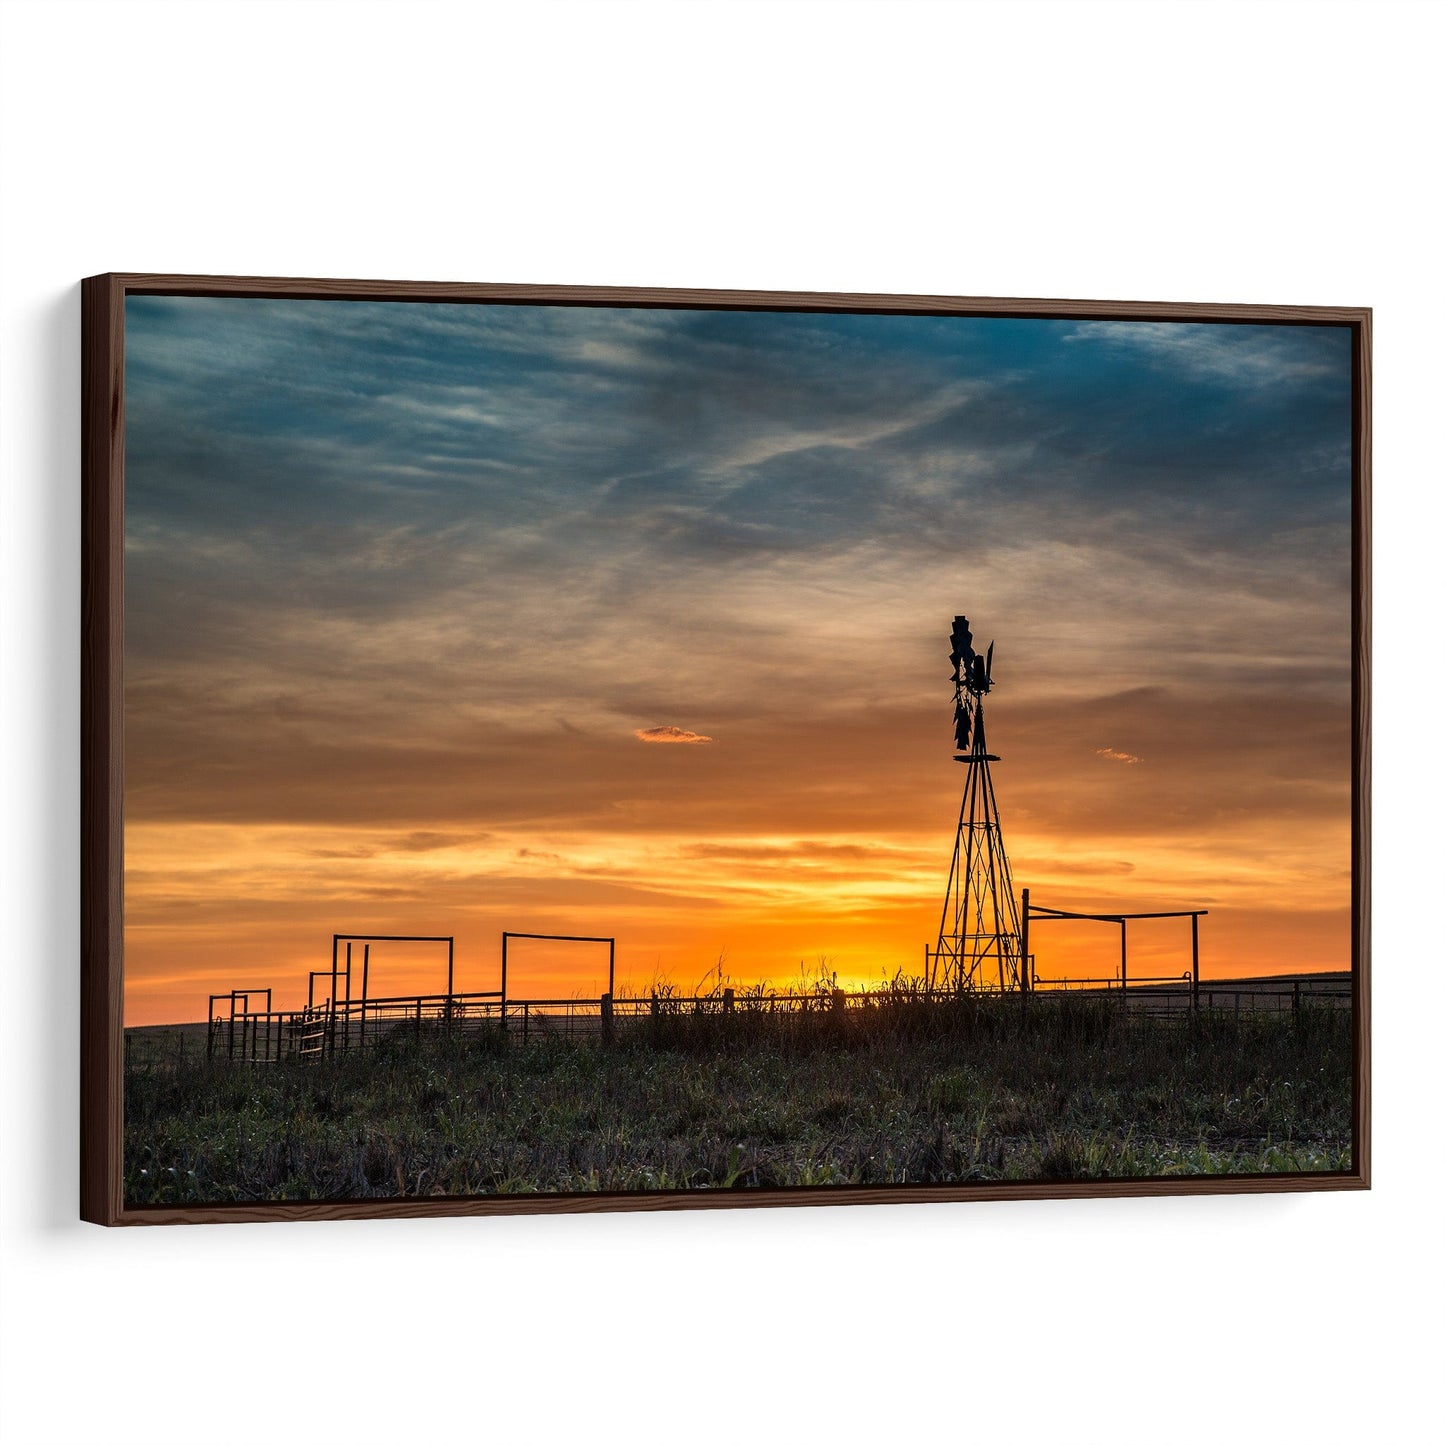 Windmill Photo at Sunset Canvas-Walnut Frame / 12 x 18 Inches Wall Art Teri James Photography